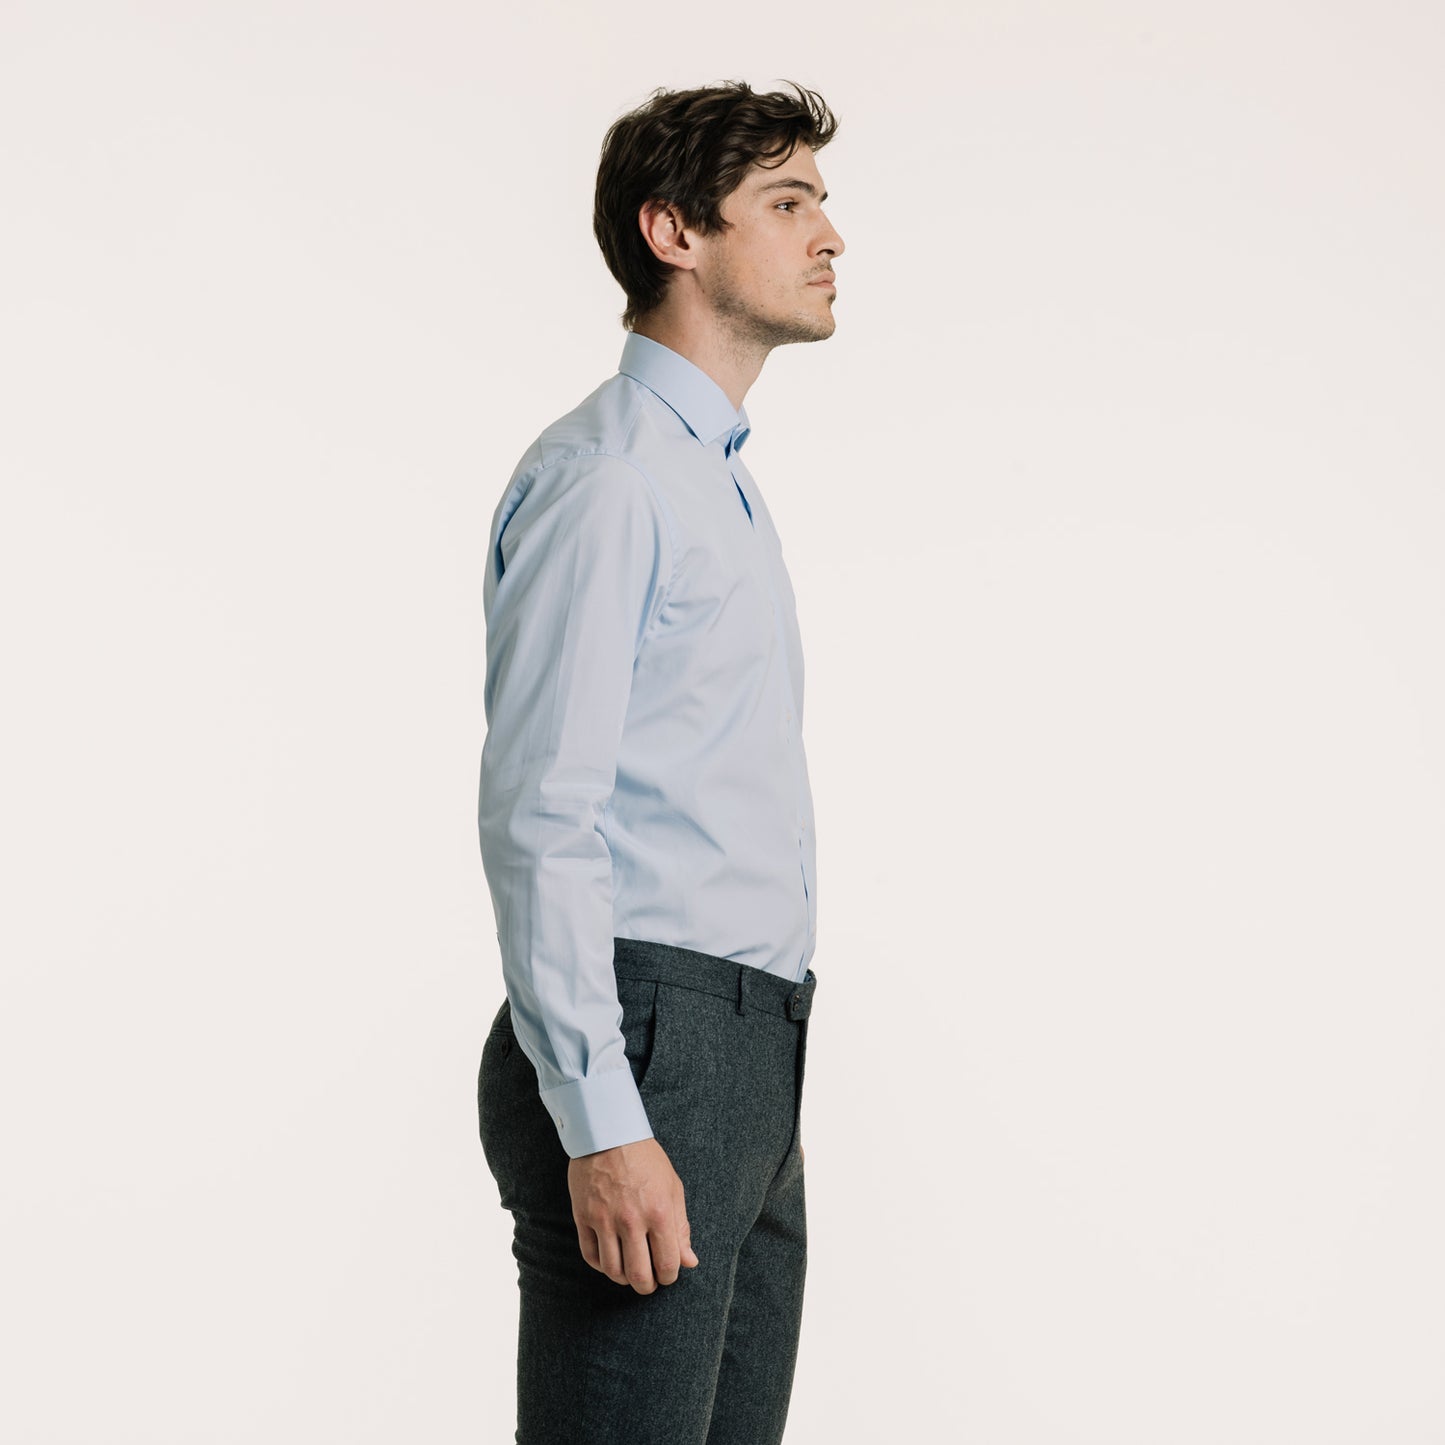 Fitted shirt in blue double-twisted poplin